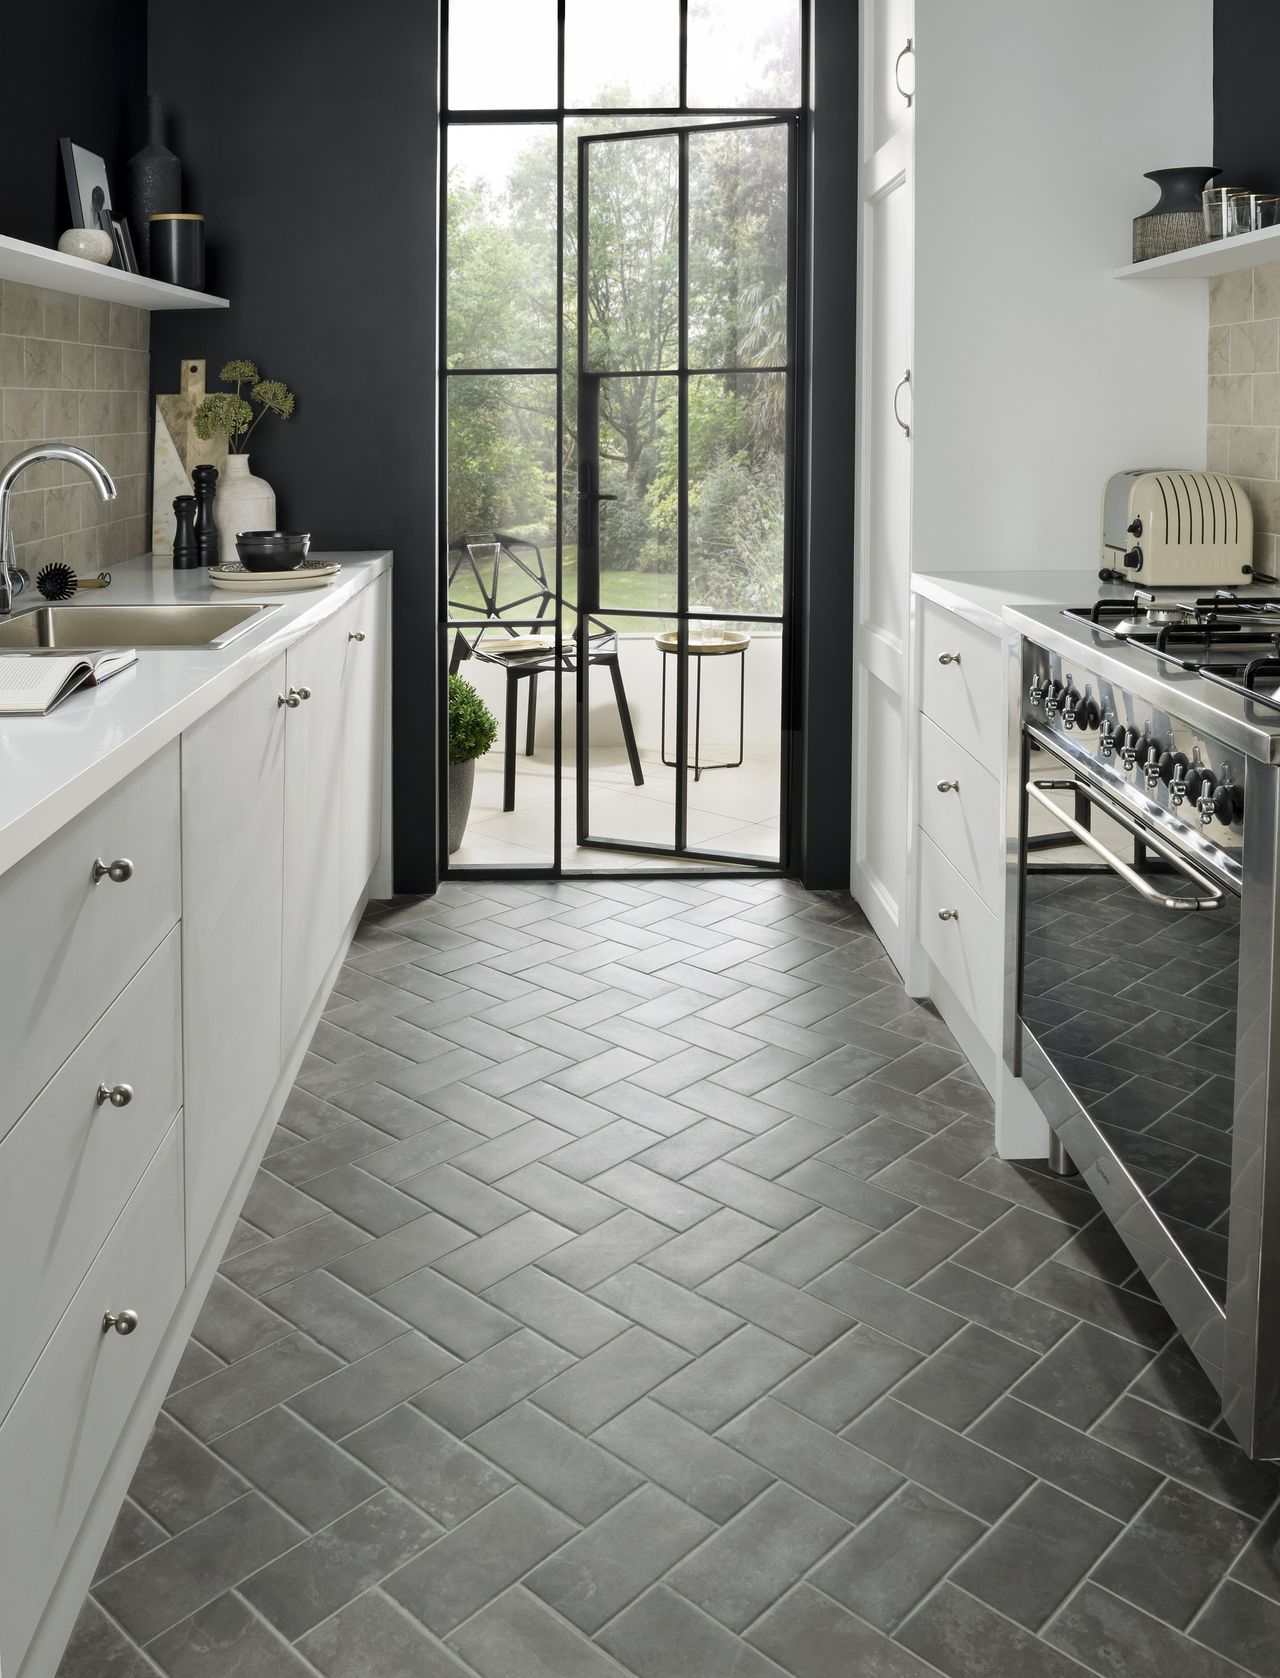 16 small kitchen tile ideas styles, tips and hacks to make your space